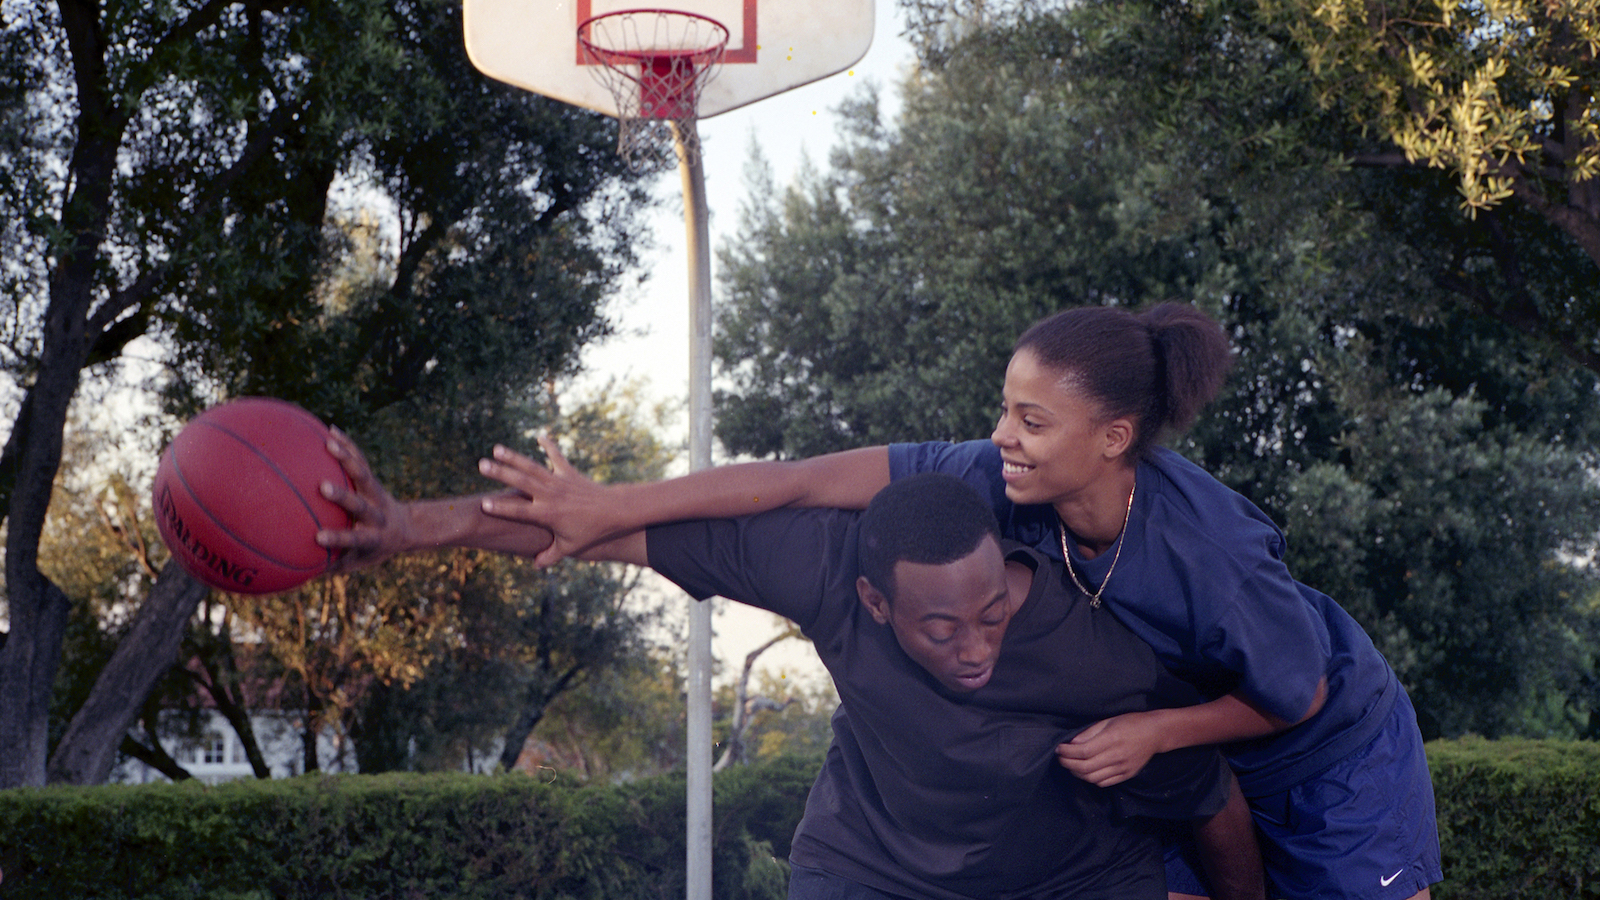 A young man and woman play basketball at an outdoor court, she's trying to block him while smiling